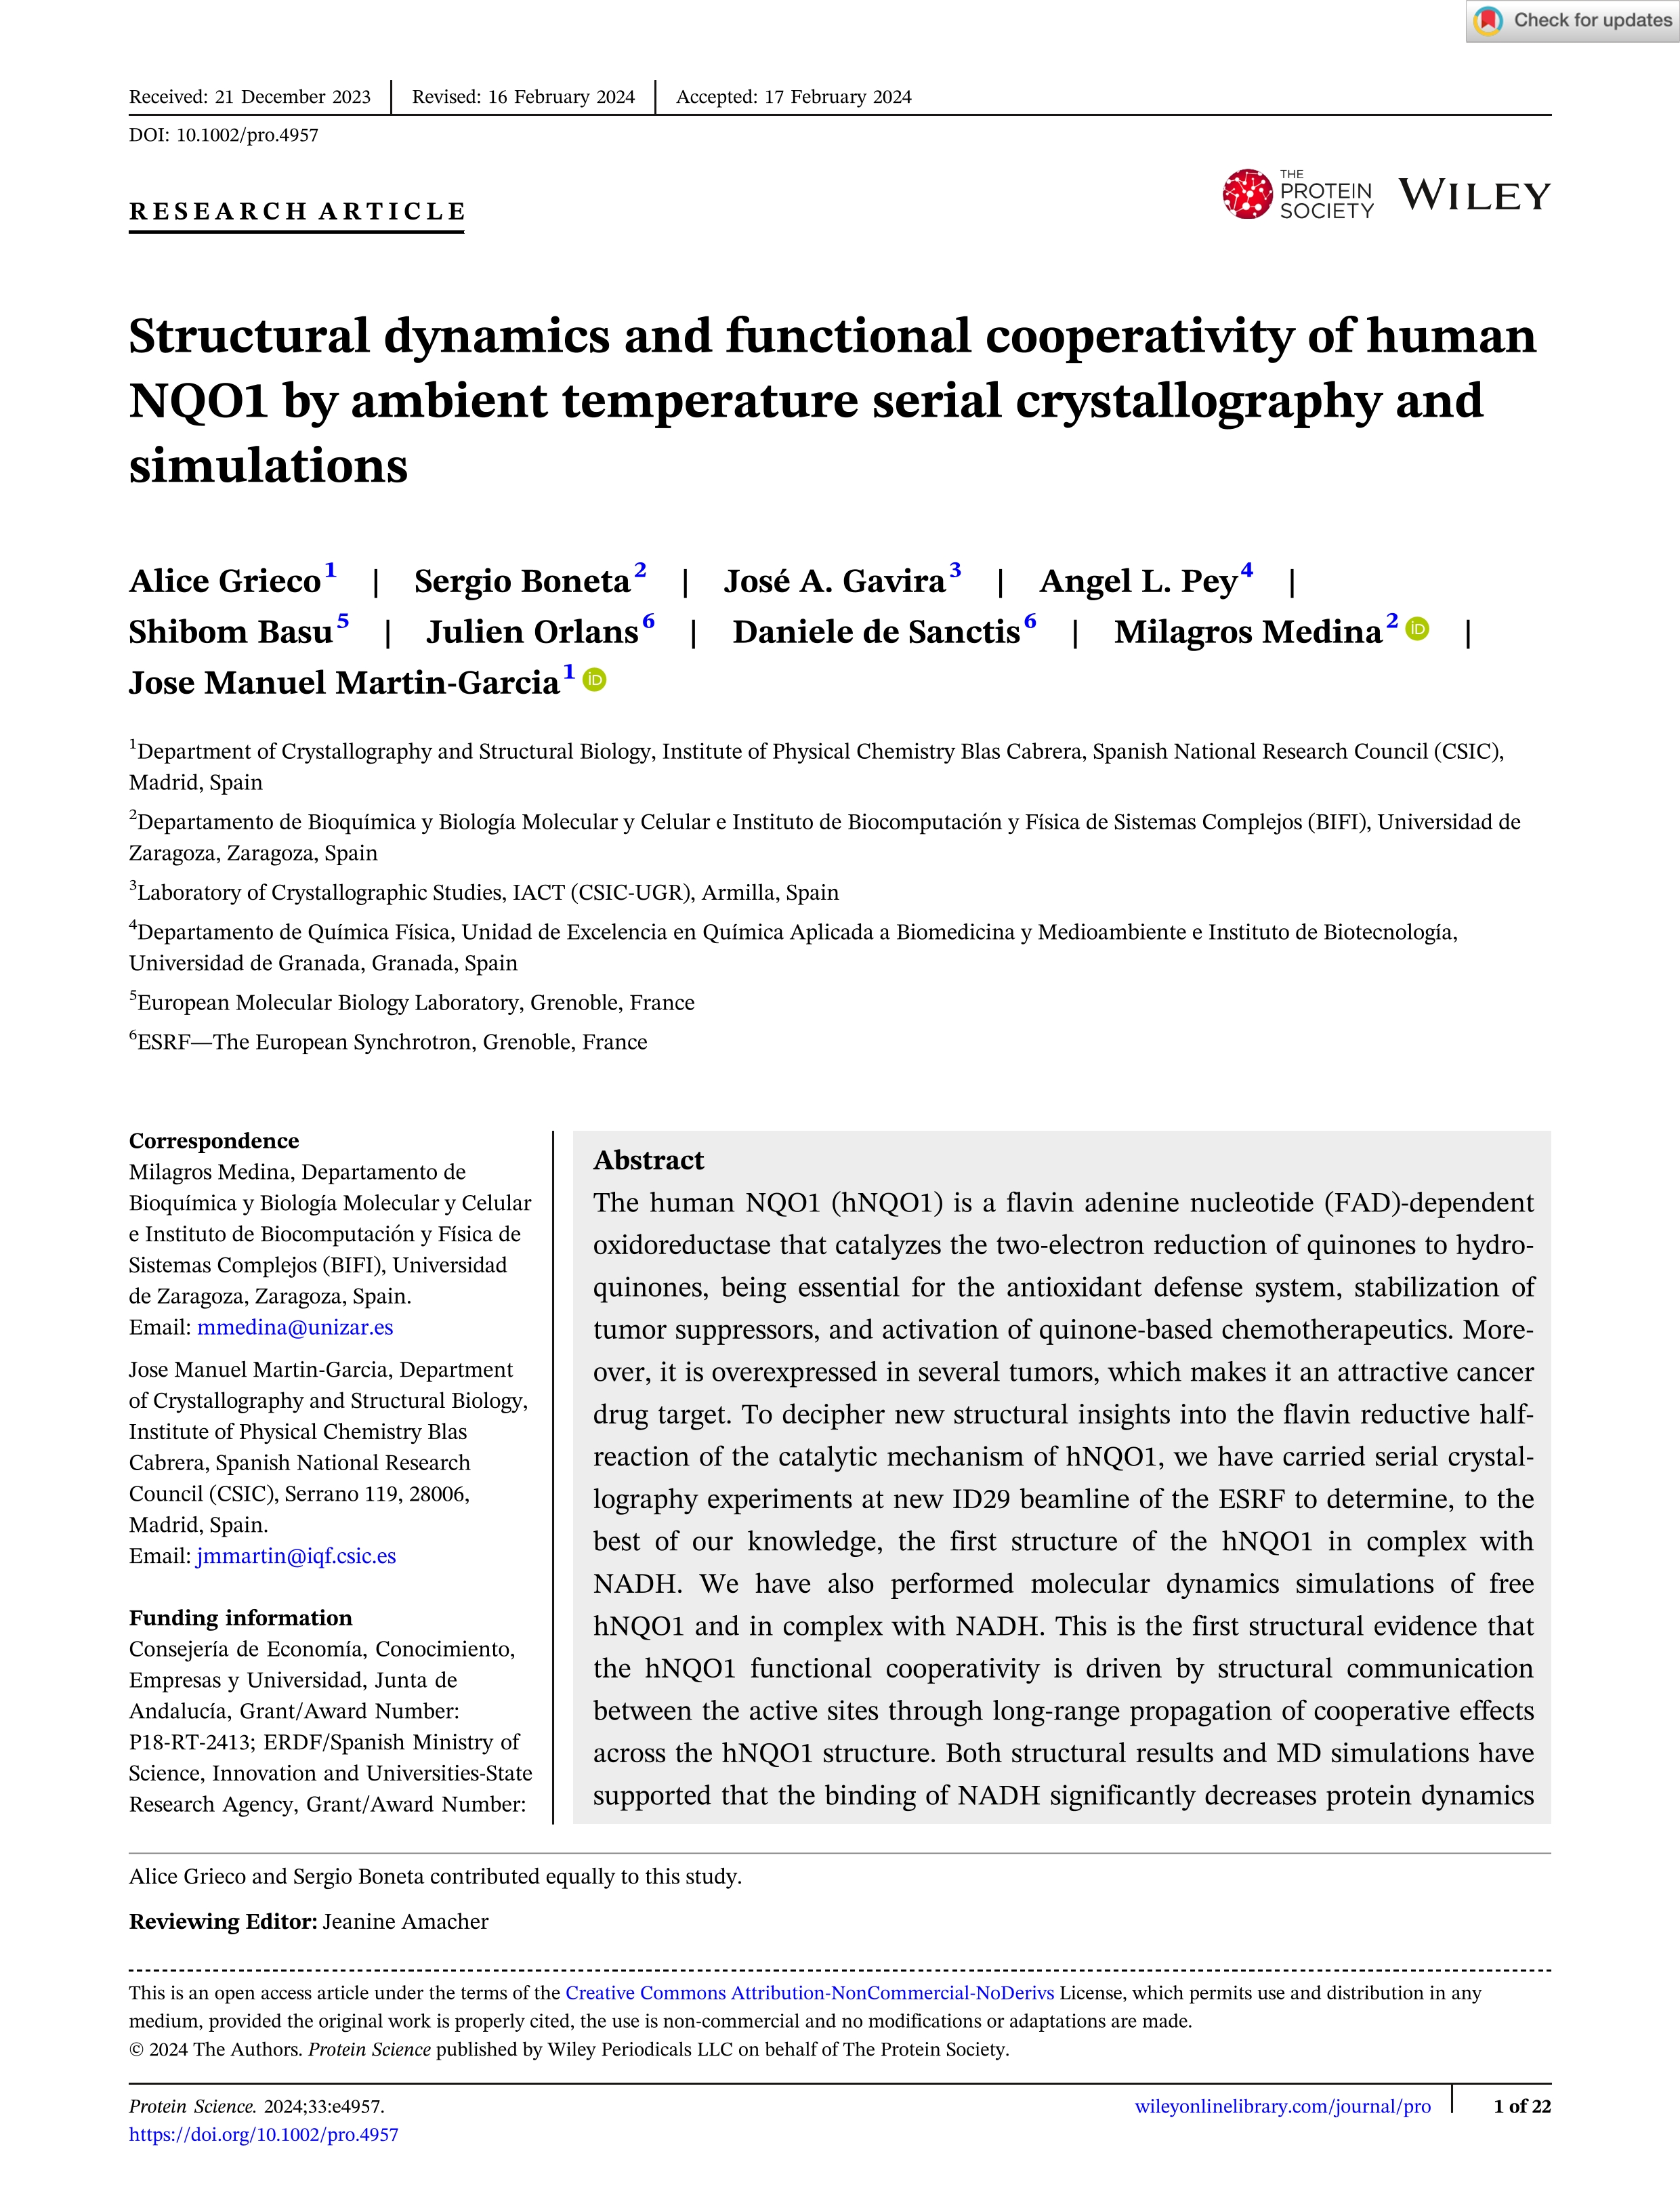 Structural dynamics and functional cooperativity of human <scp>NQO1</scp> by ambient temperature serial crystallography and simulations